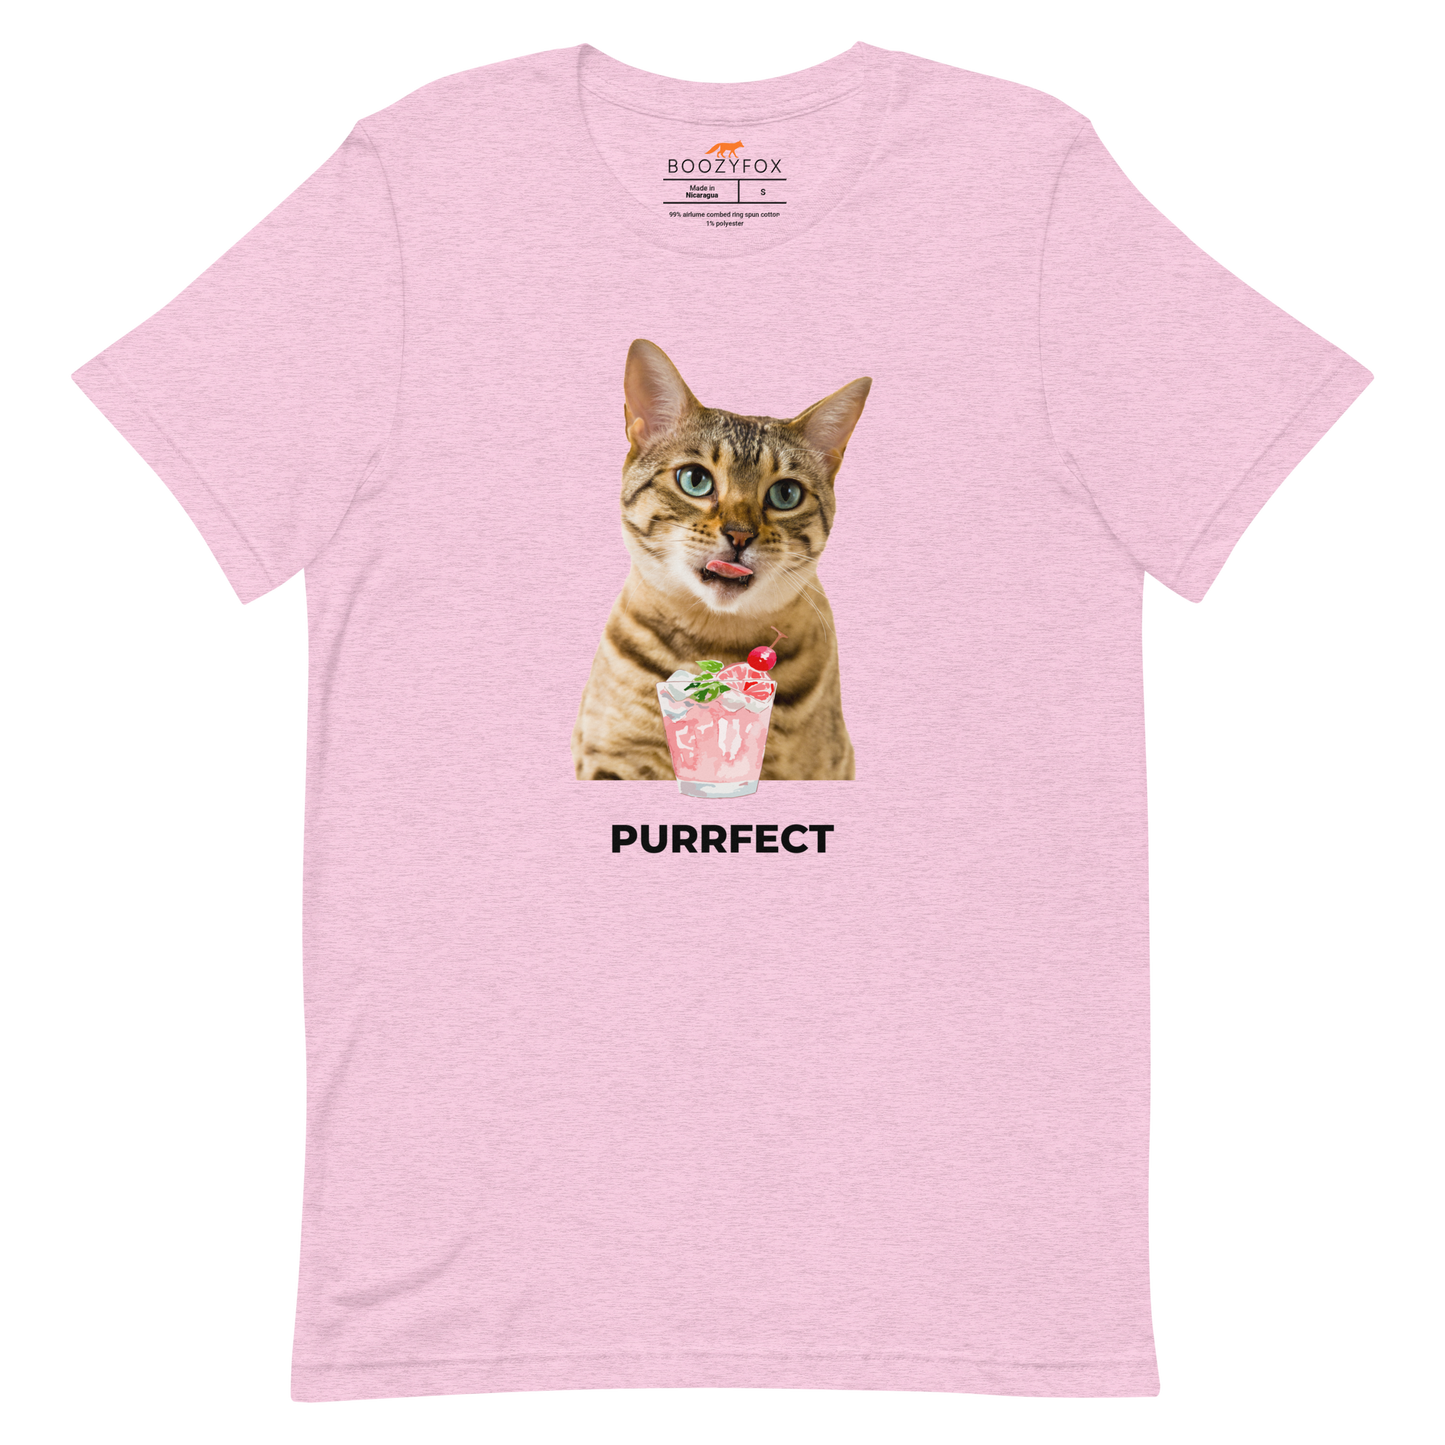 Heather Prism Lilac Premium Cat T-Shirt featuring a Purrfect graphic on the chest - Funny Graphic Cat Tees - Boozy Fox